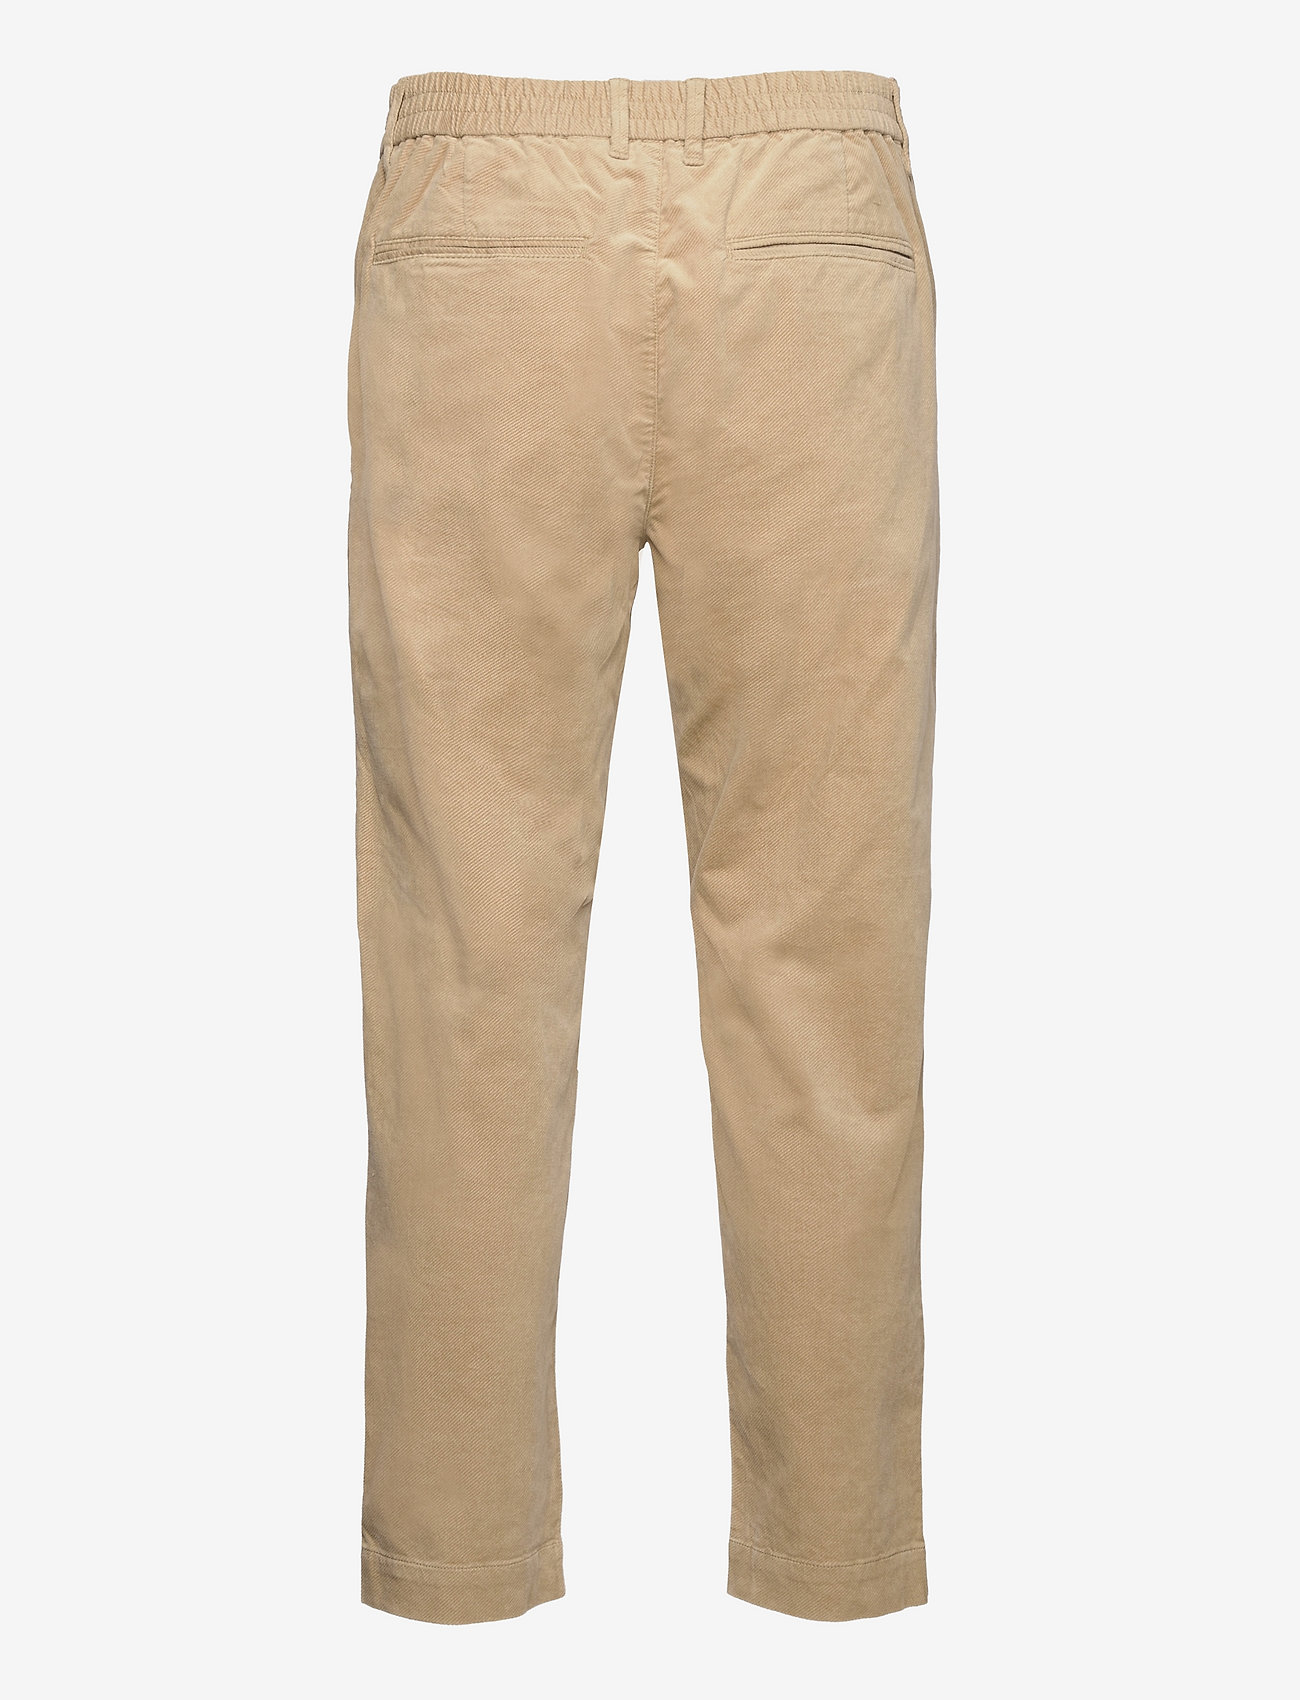 Esprit Collection - Men Pants woven cropped - chinos - beige - 1